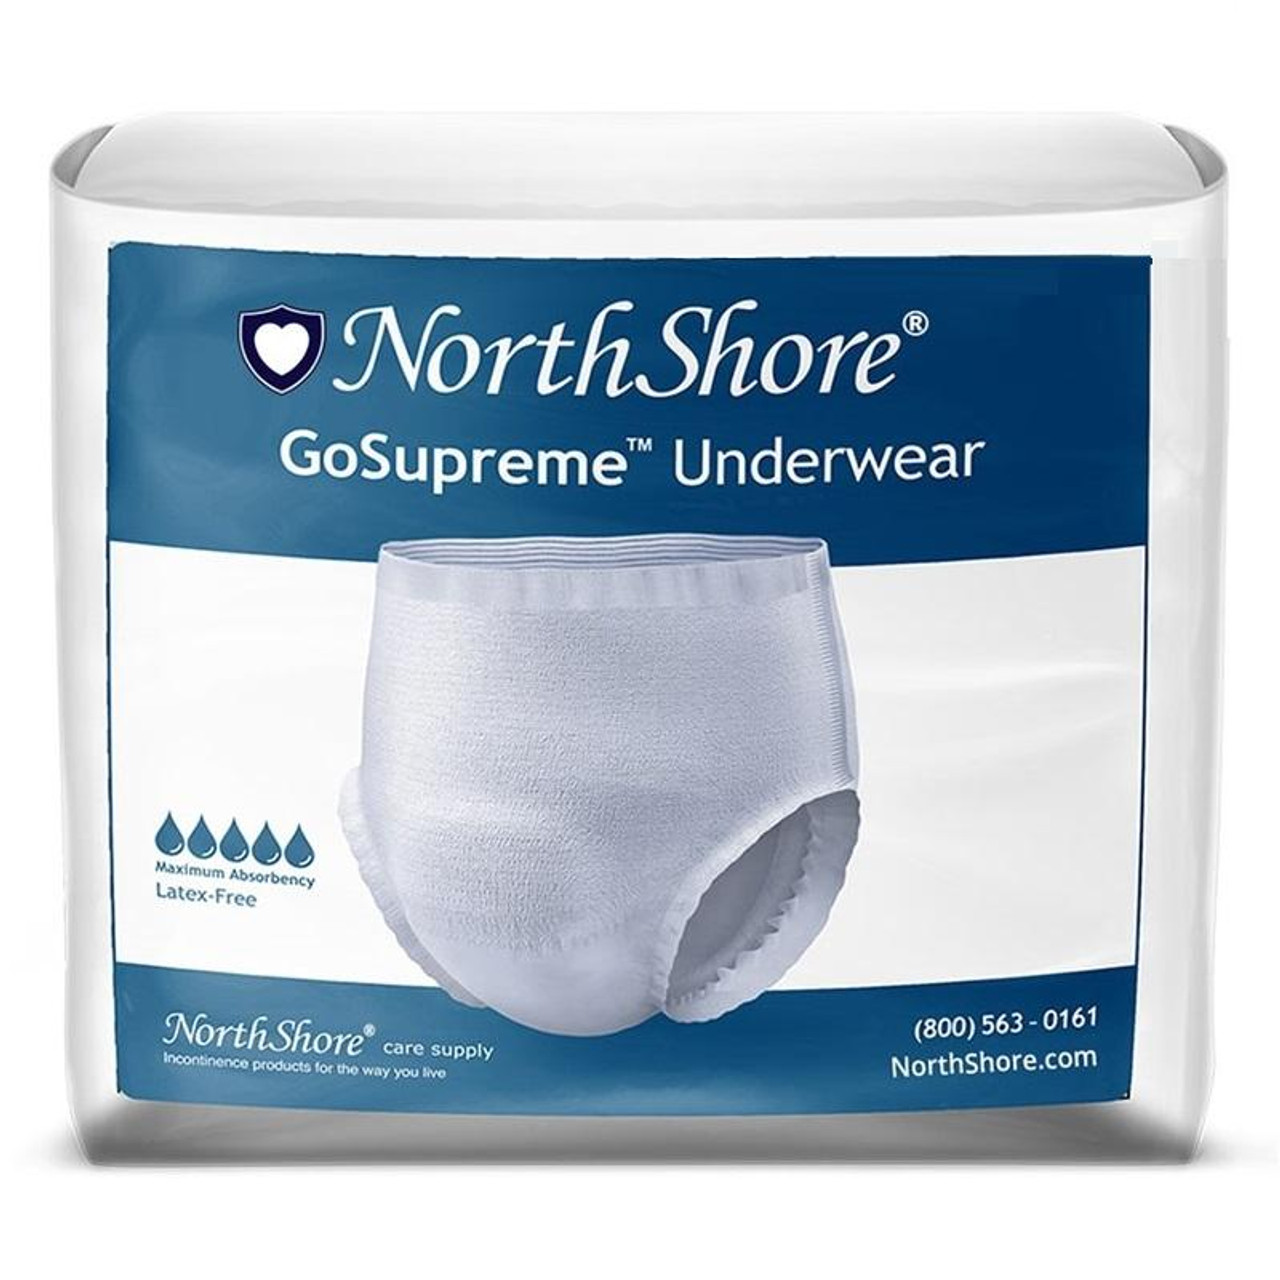 NorthShore Supreme Quilted Wipes, X-Large Adult Sized Cleansing Wipes